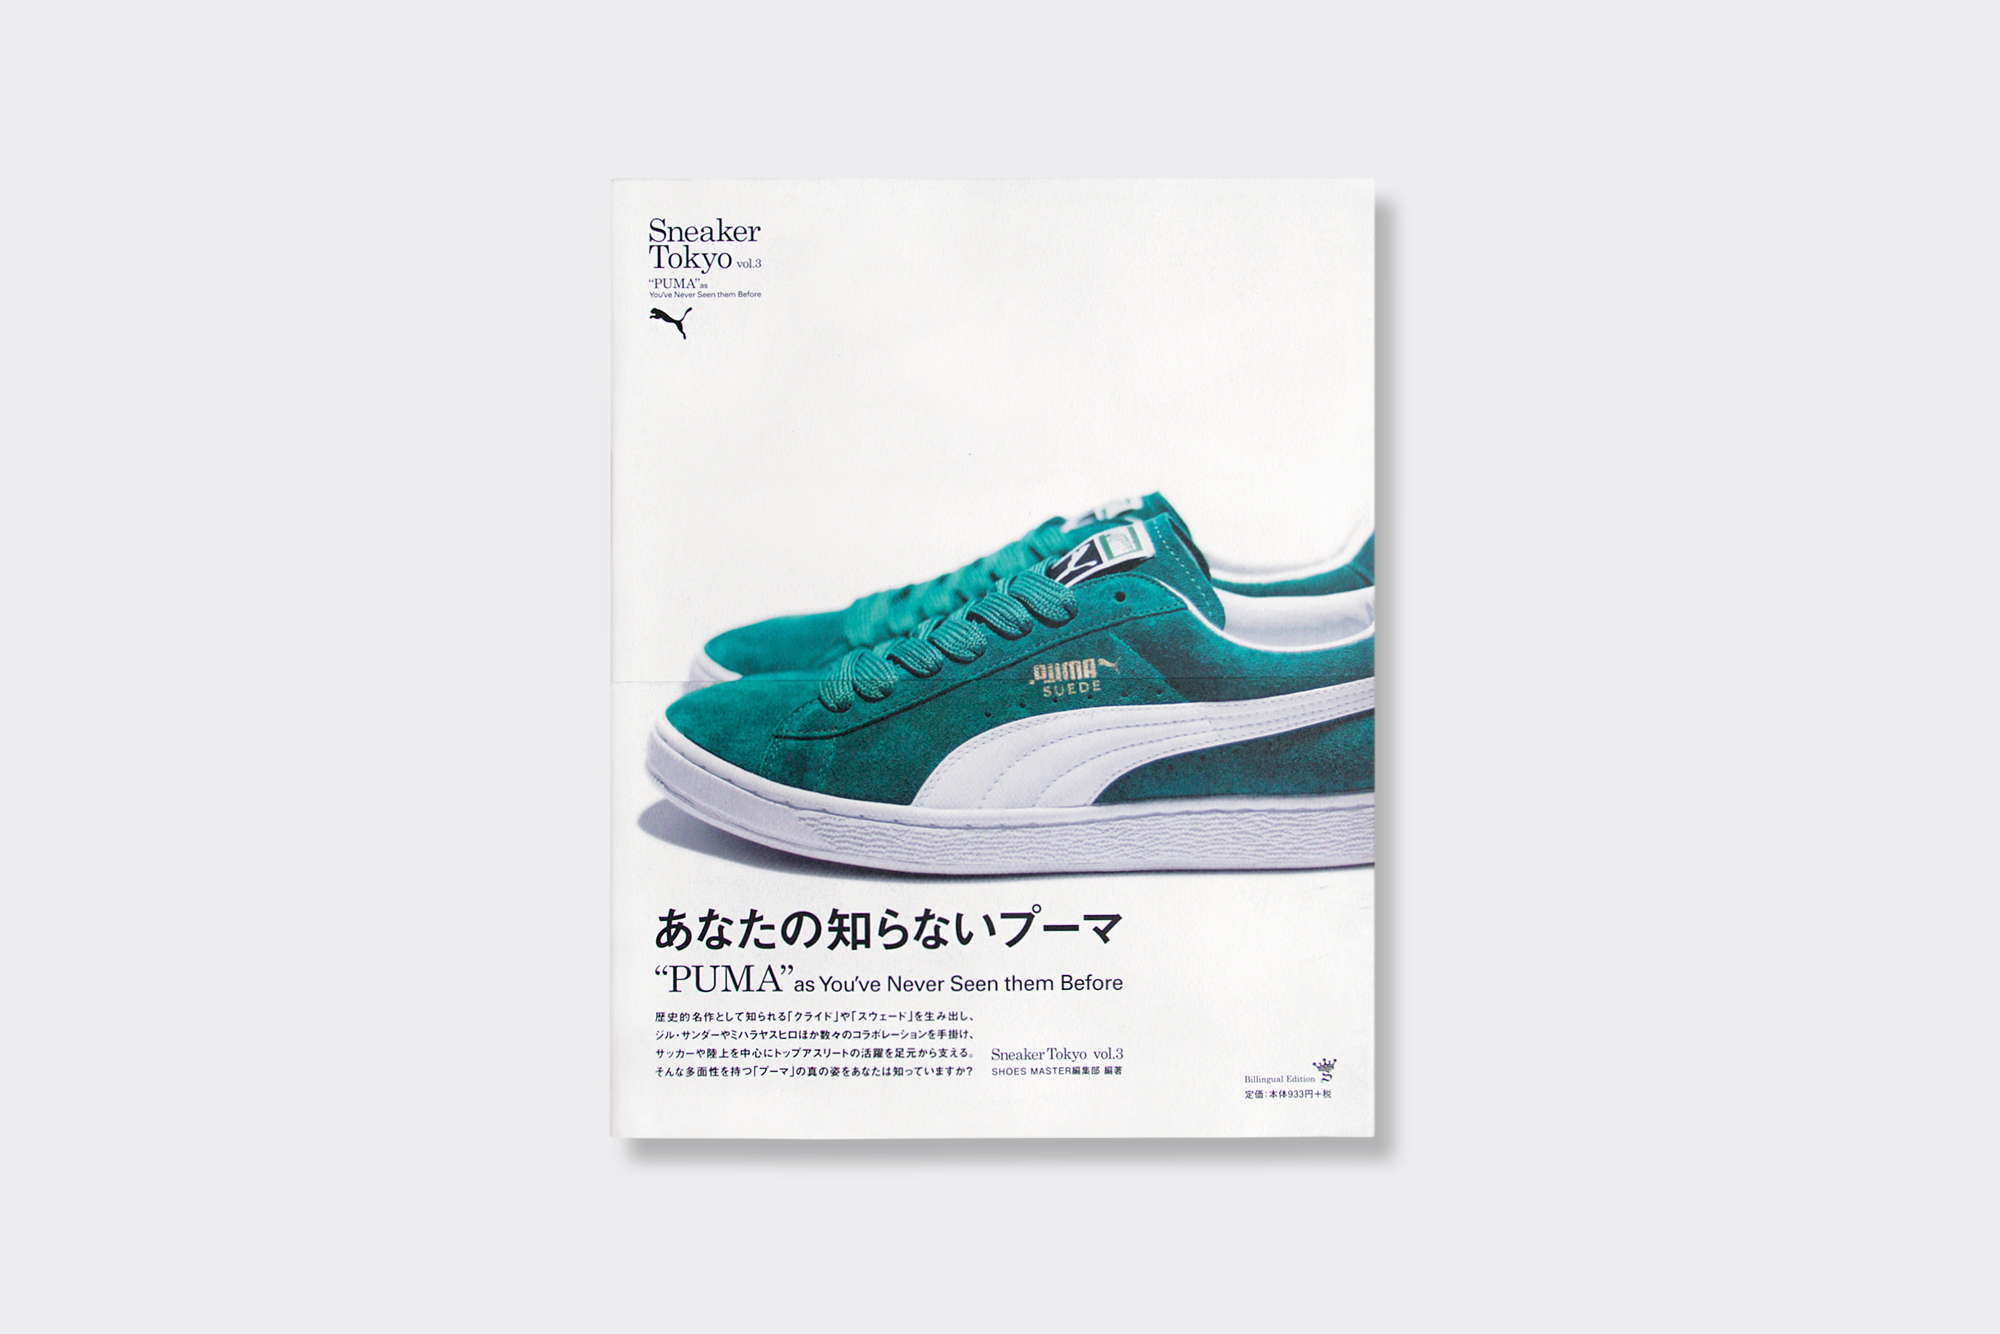 Sneaker Tokyo Vol. 3 - Puma As You've Never Seen Them Before (2010)